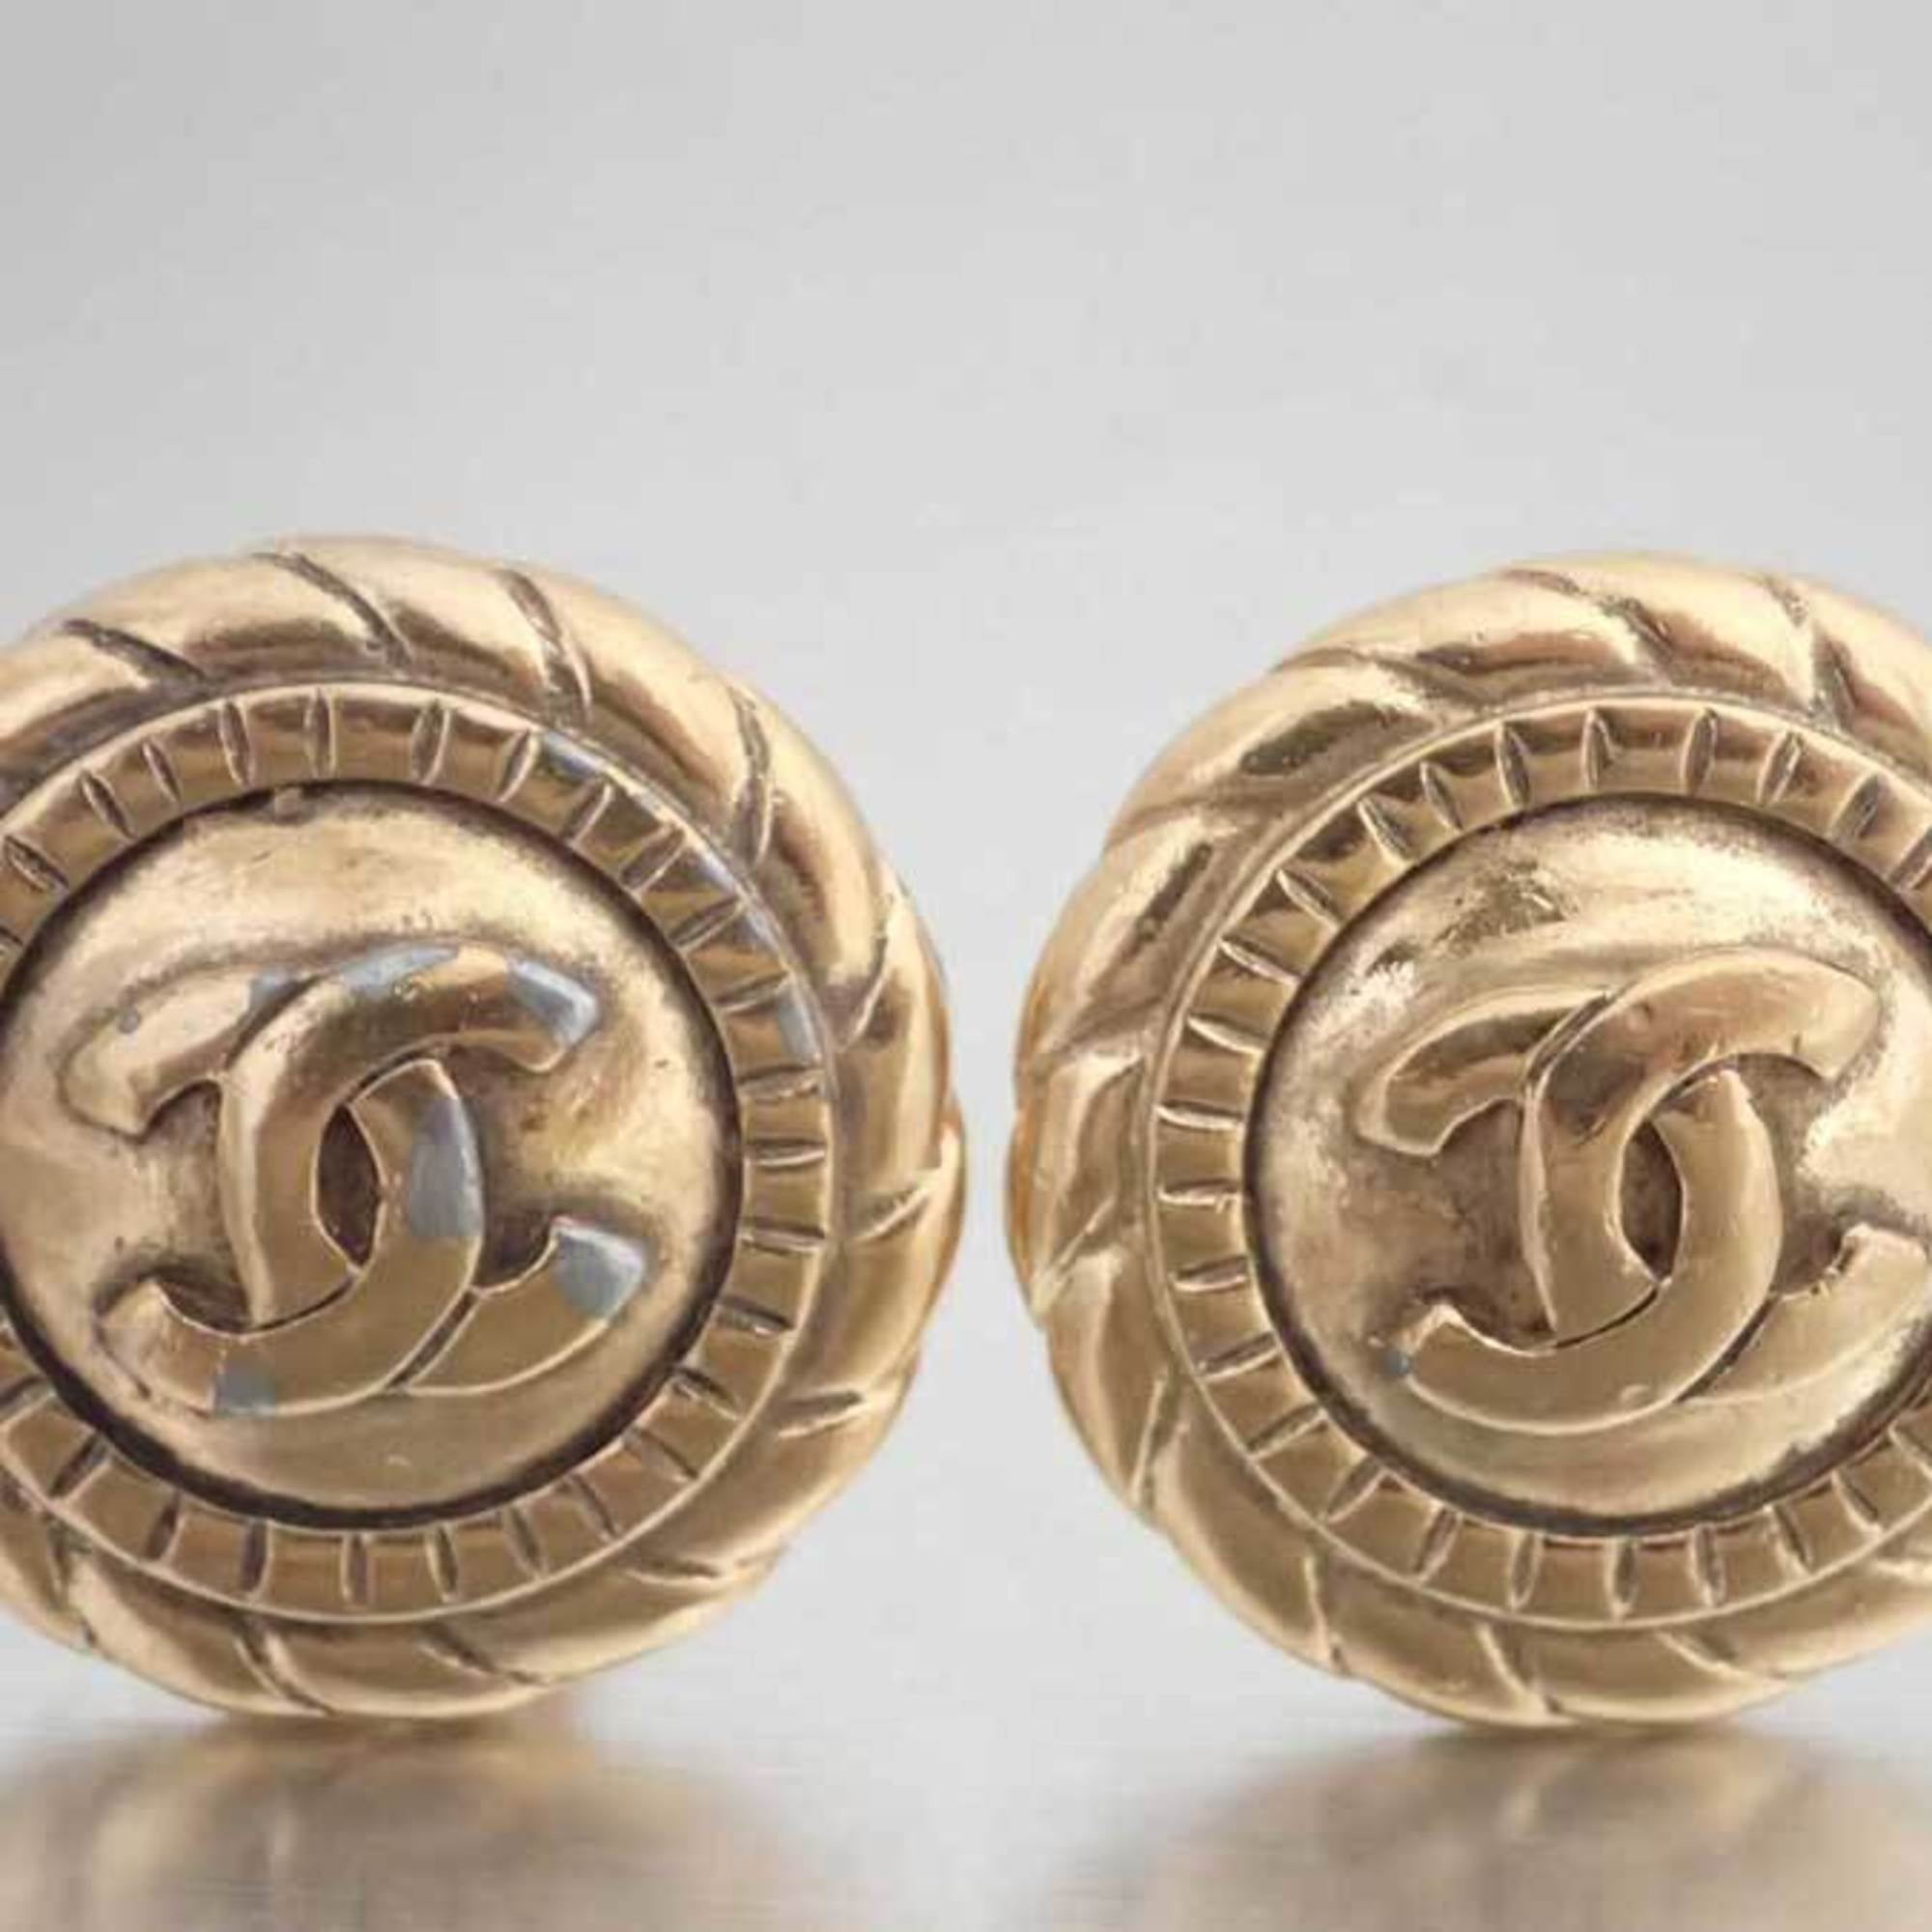 Chanel - Authenticated CC Earrings - Metal Gold for Women, Never Worn